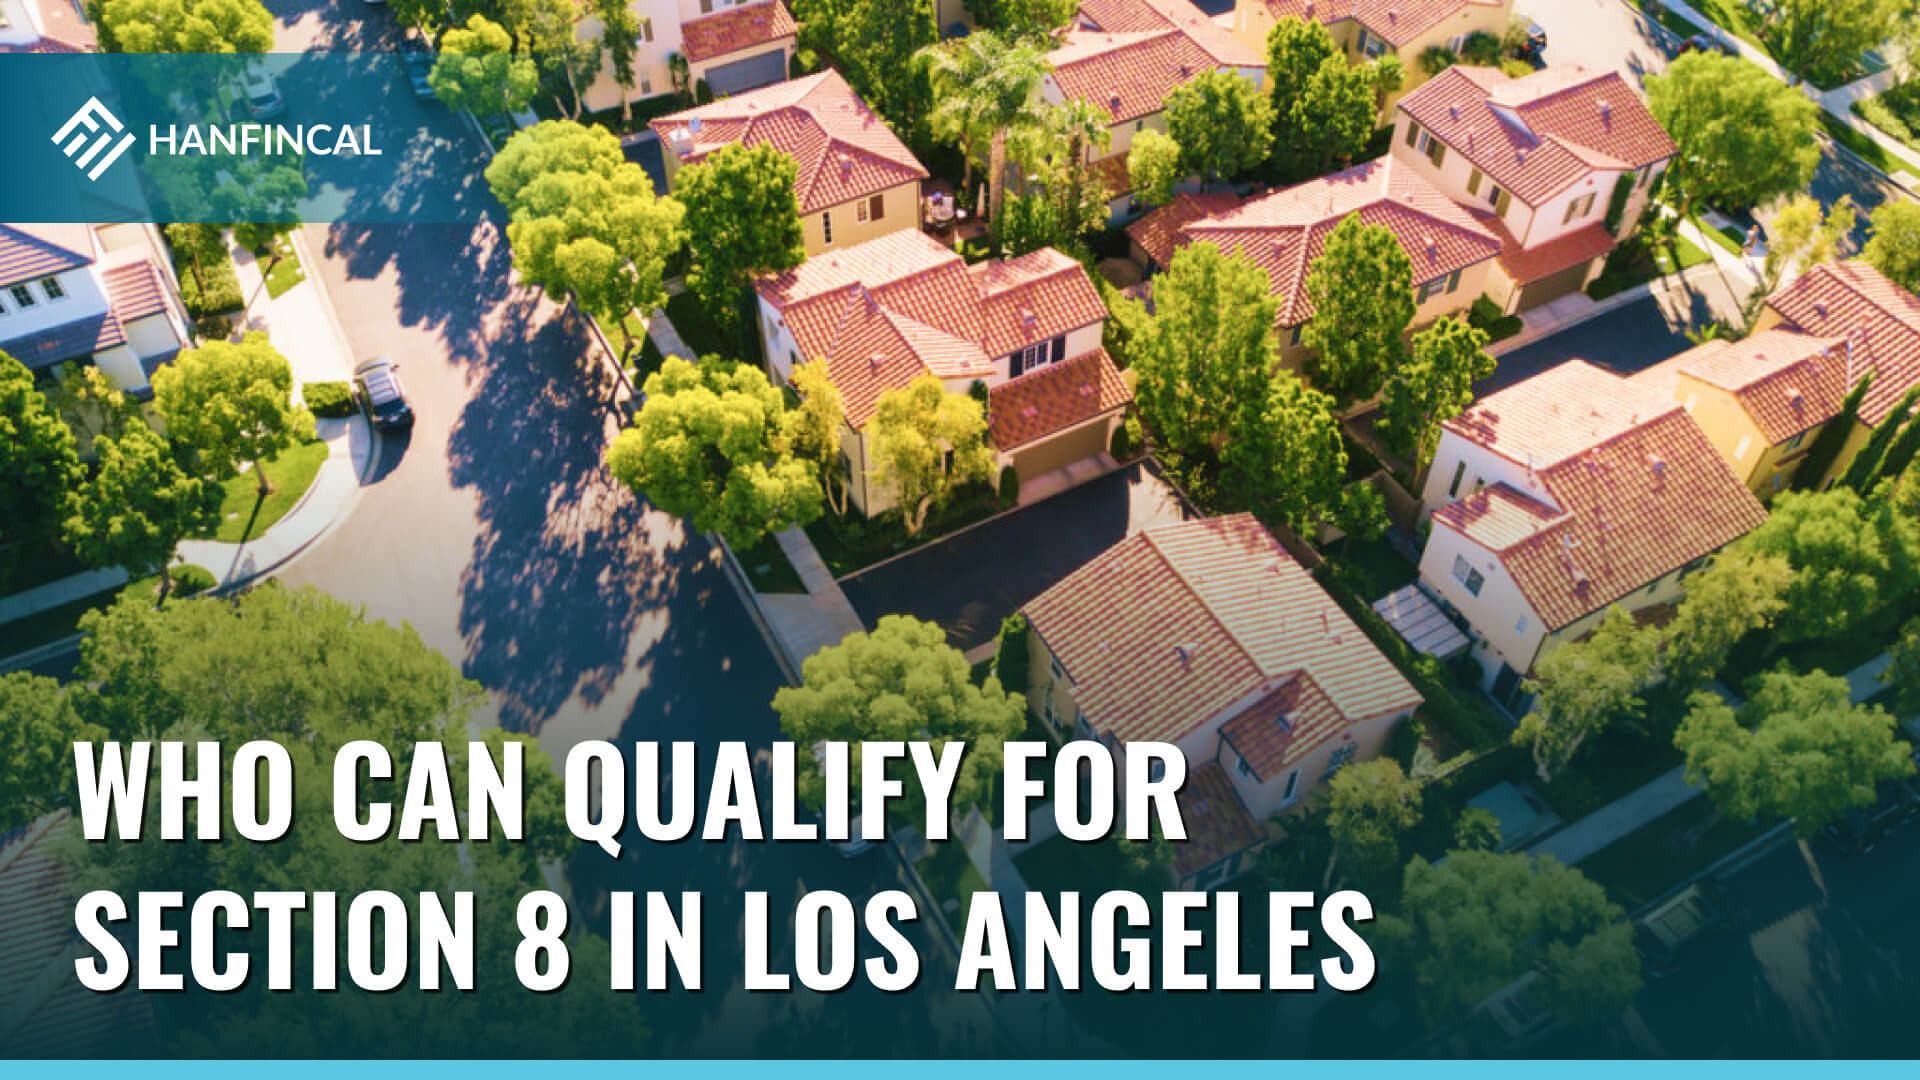 Who can qualify for Section 8 in Los Angeles (LA)?